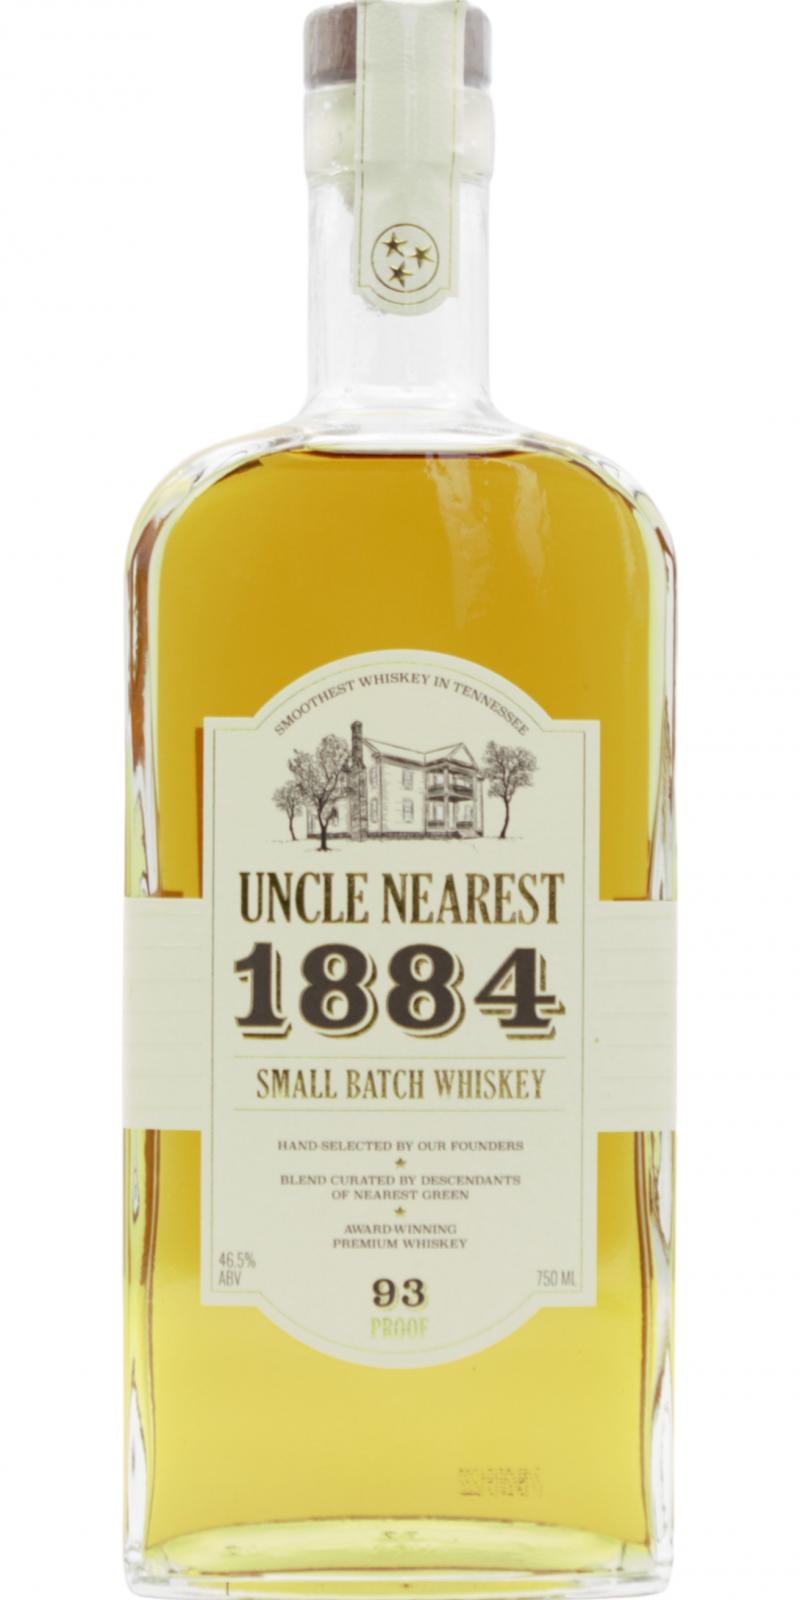 uncle nearest whiskey stock